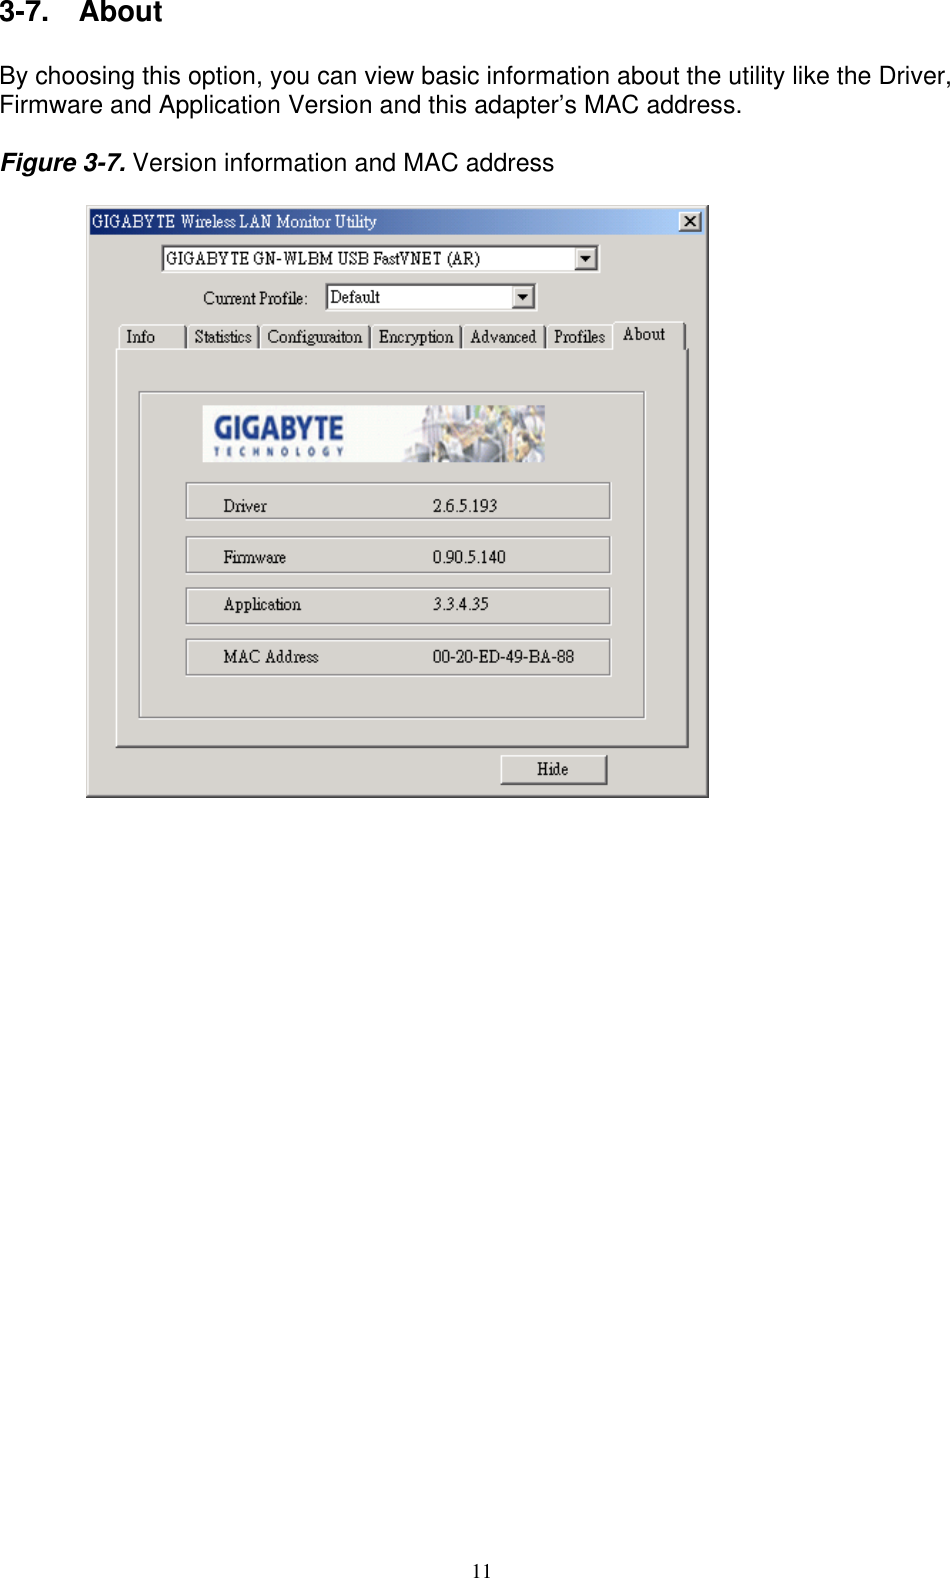 11   3-7.  About  By choosing this option, you can view basic information about the utility like the Driver, Firmware and Application Version and this adapter’s MAC address.  Figure 3-7. Version information and MAC address                        